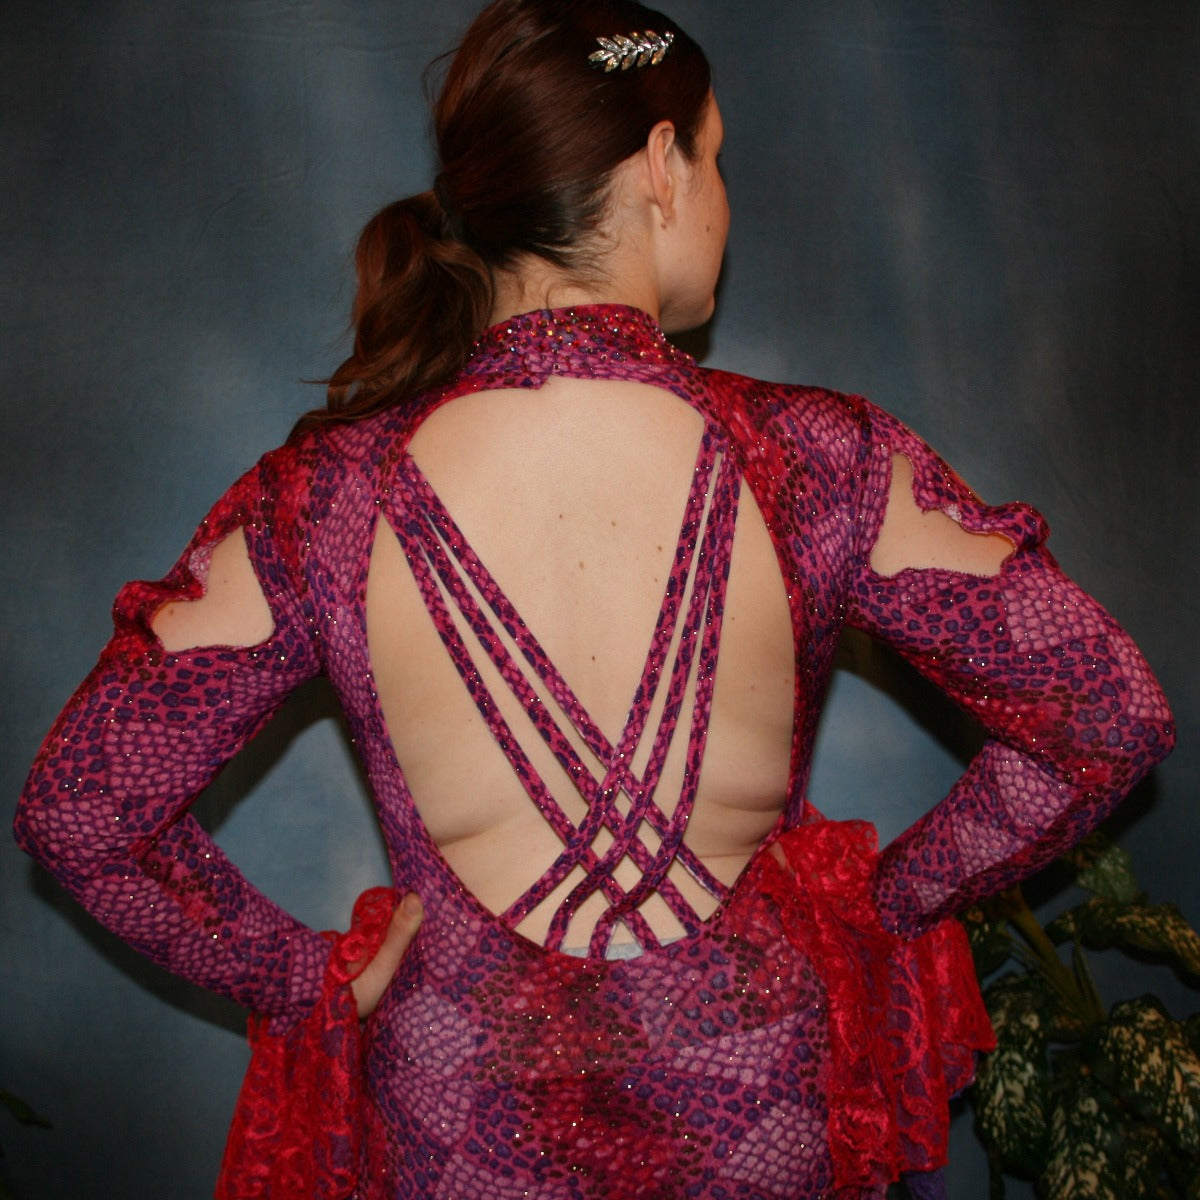 Crystal's Creations back close up view of Red & purple Latin/rhythm dress created in gorgeous printed slinky glitterknit in reptilia print of reds, purples & orchids with nude illusion cutouts…oodles of lace flounces…embellished with siam & siam Ab Swarovski stonework.